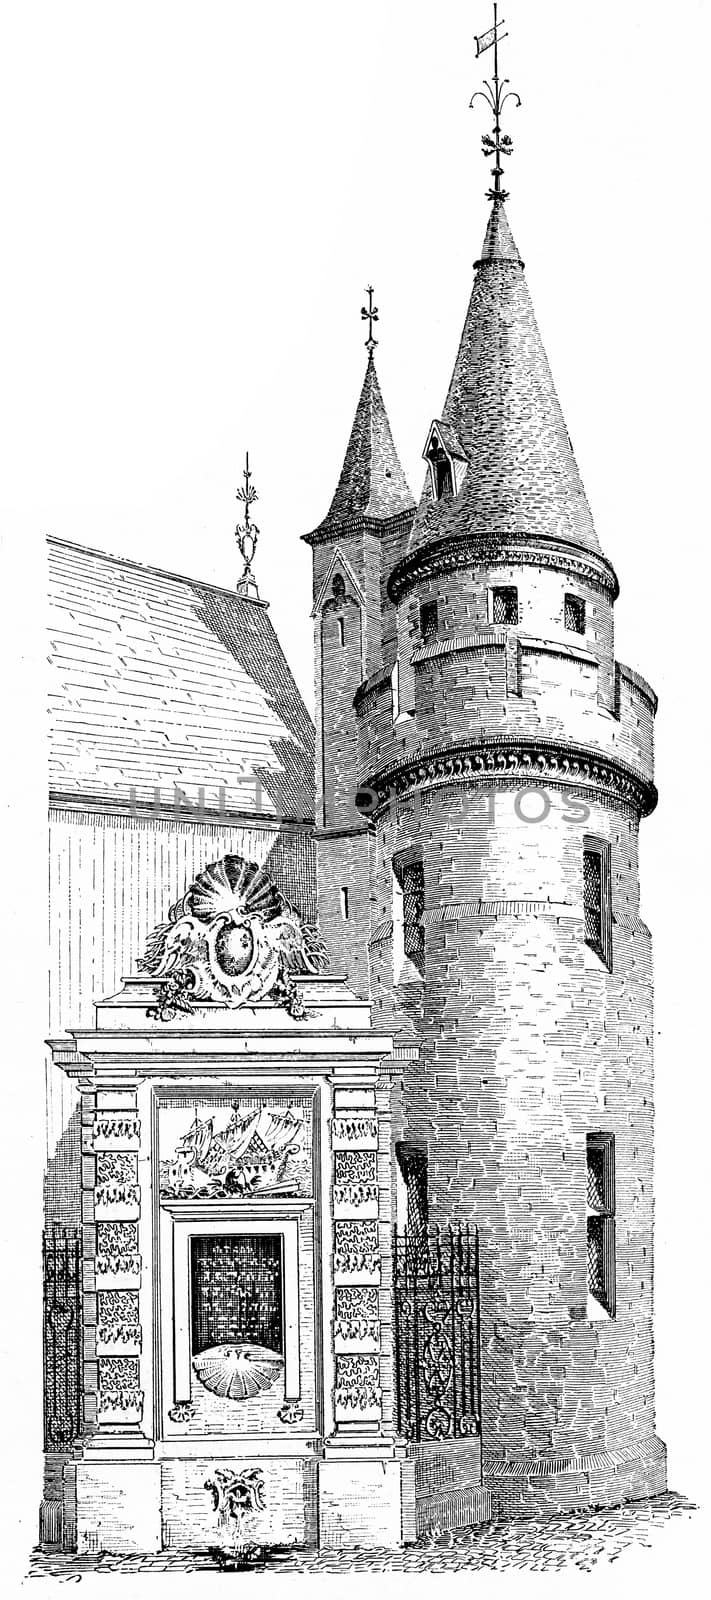 Fountain and Tower of Green wood, vintage engraved illustration. Paris - Auguste VITU – 1890.